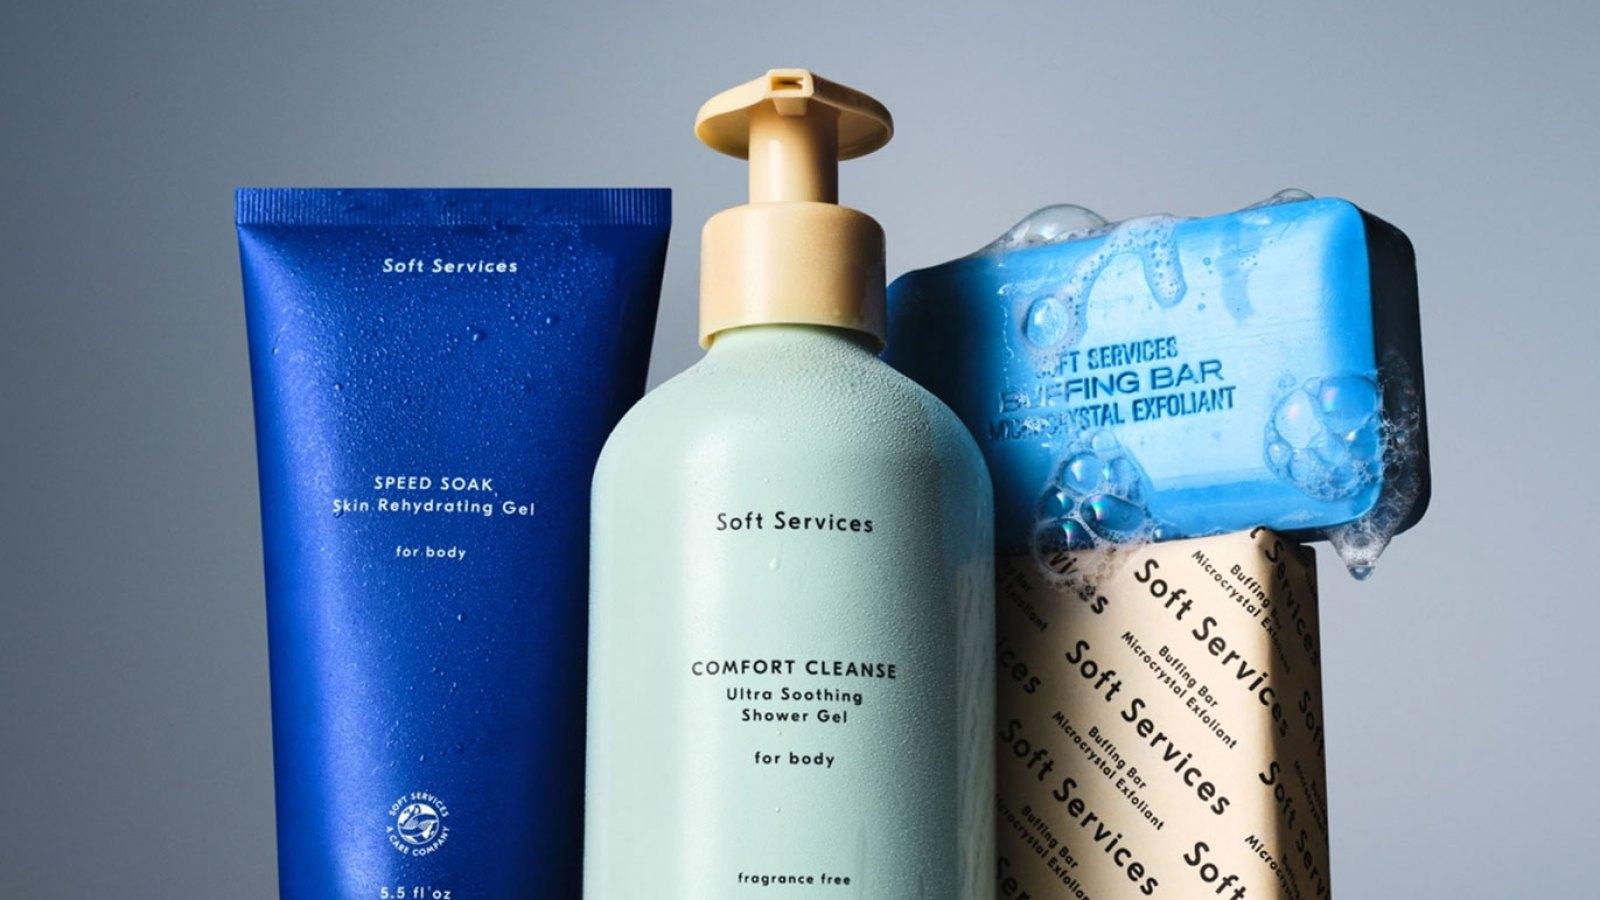 Find Out Why Shoppers ‘Love’ This Skincare Set from Soft Services: ‘A Force to Be Reckoned With’